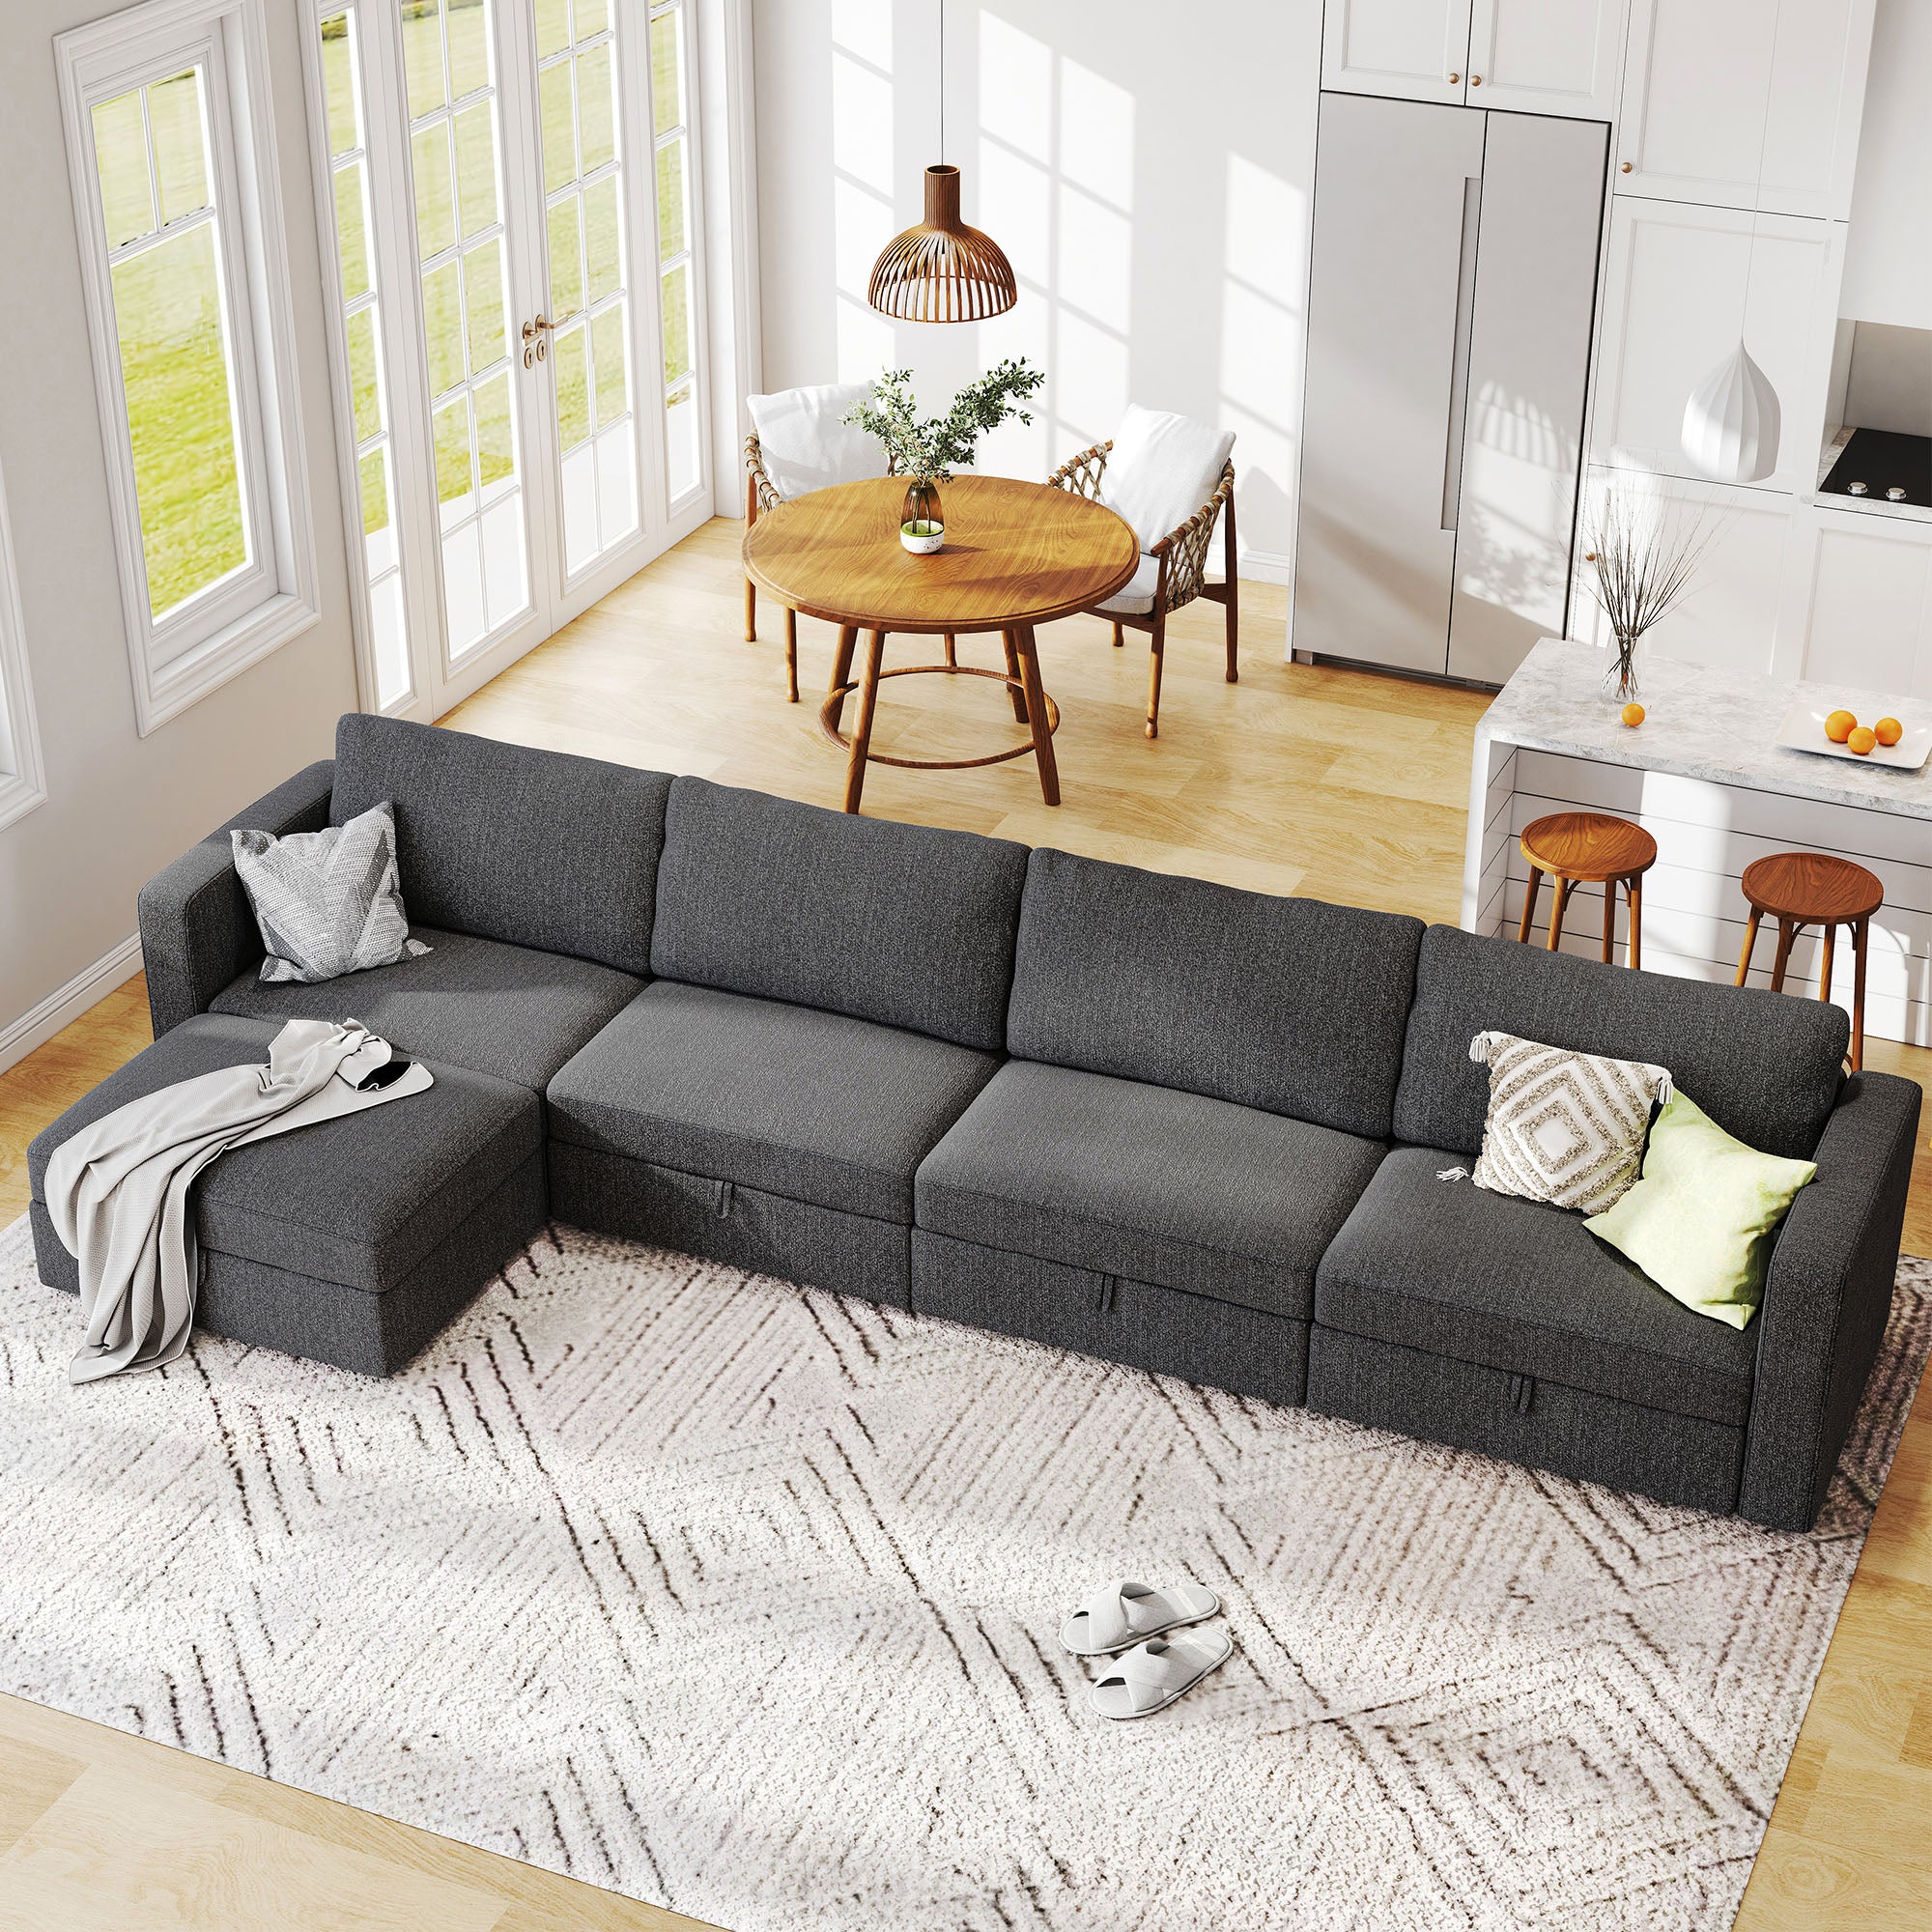 HONBAY Fabric Luxurious L-shaped 4 Seaters Modular Sectional Sofa for Living Room